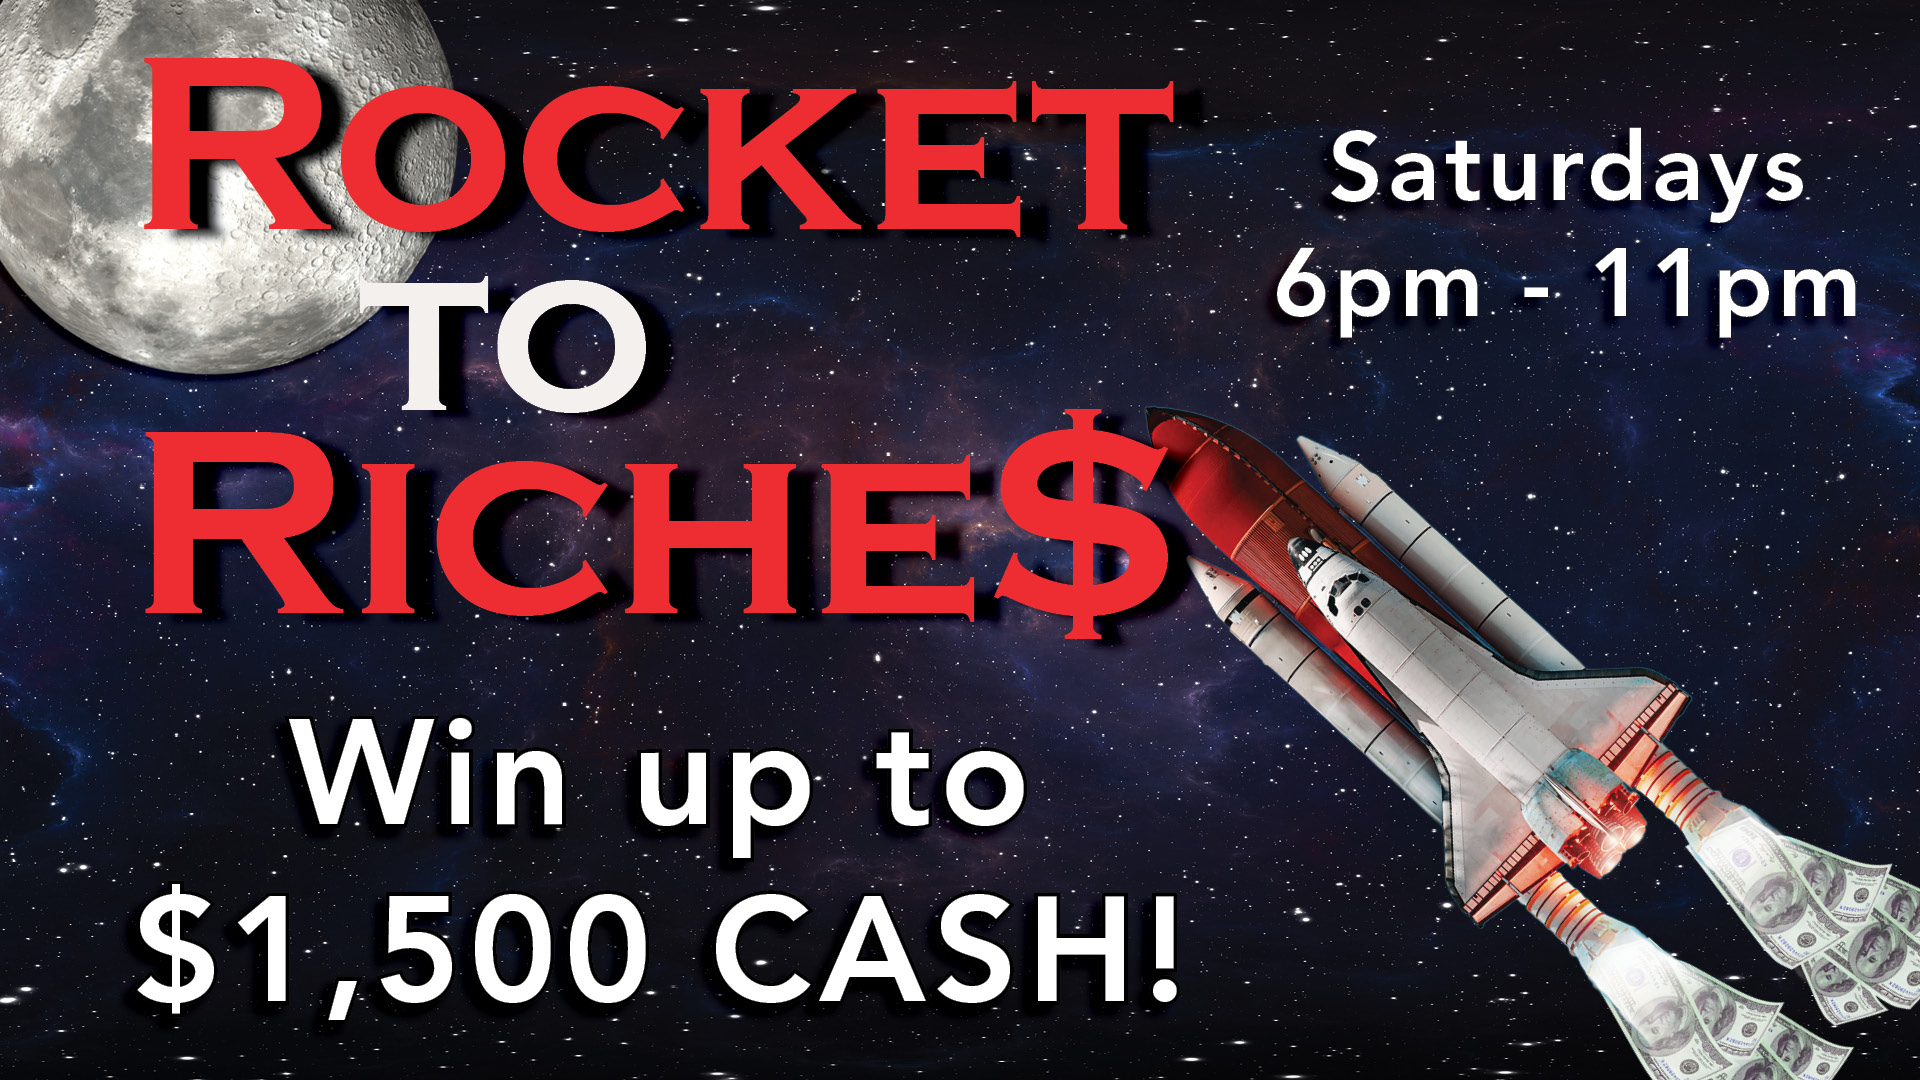 Rocket to Riches, cash, cash prizes, earned entry, drawings, casino promotion, gray wolf, gray wolf peak casino, gray wolf promotion, gray wolf cash promotion